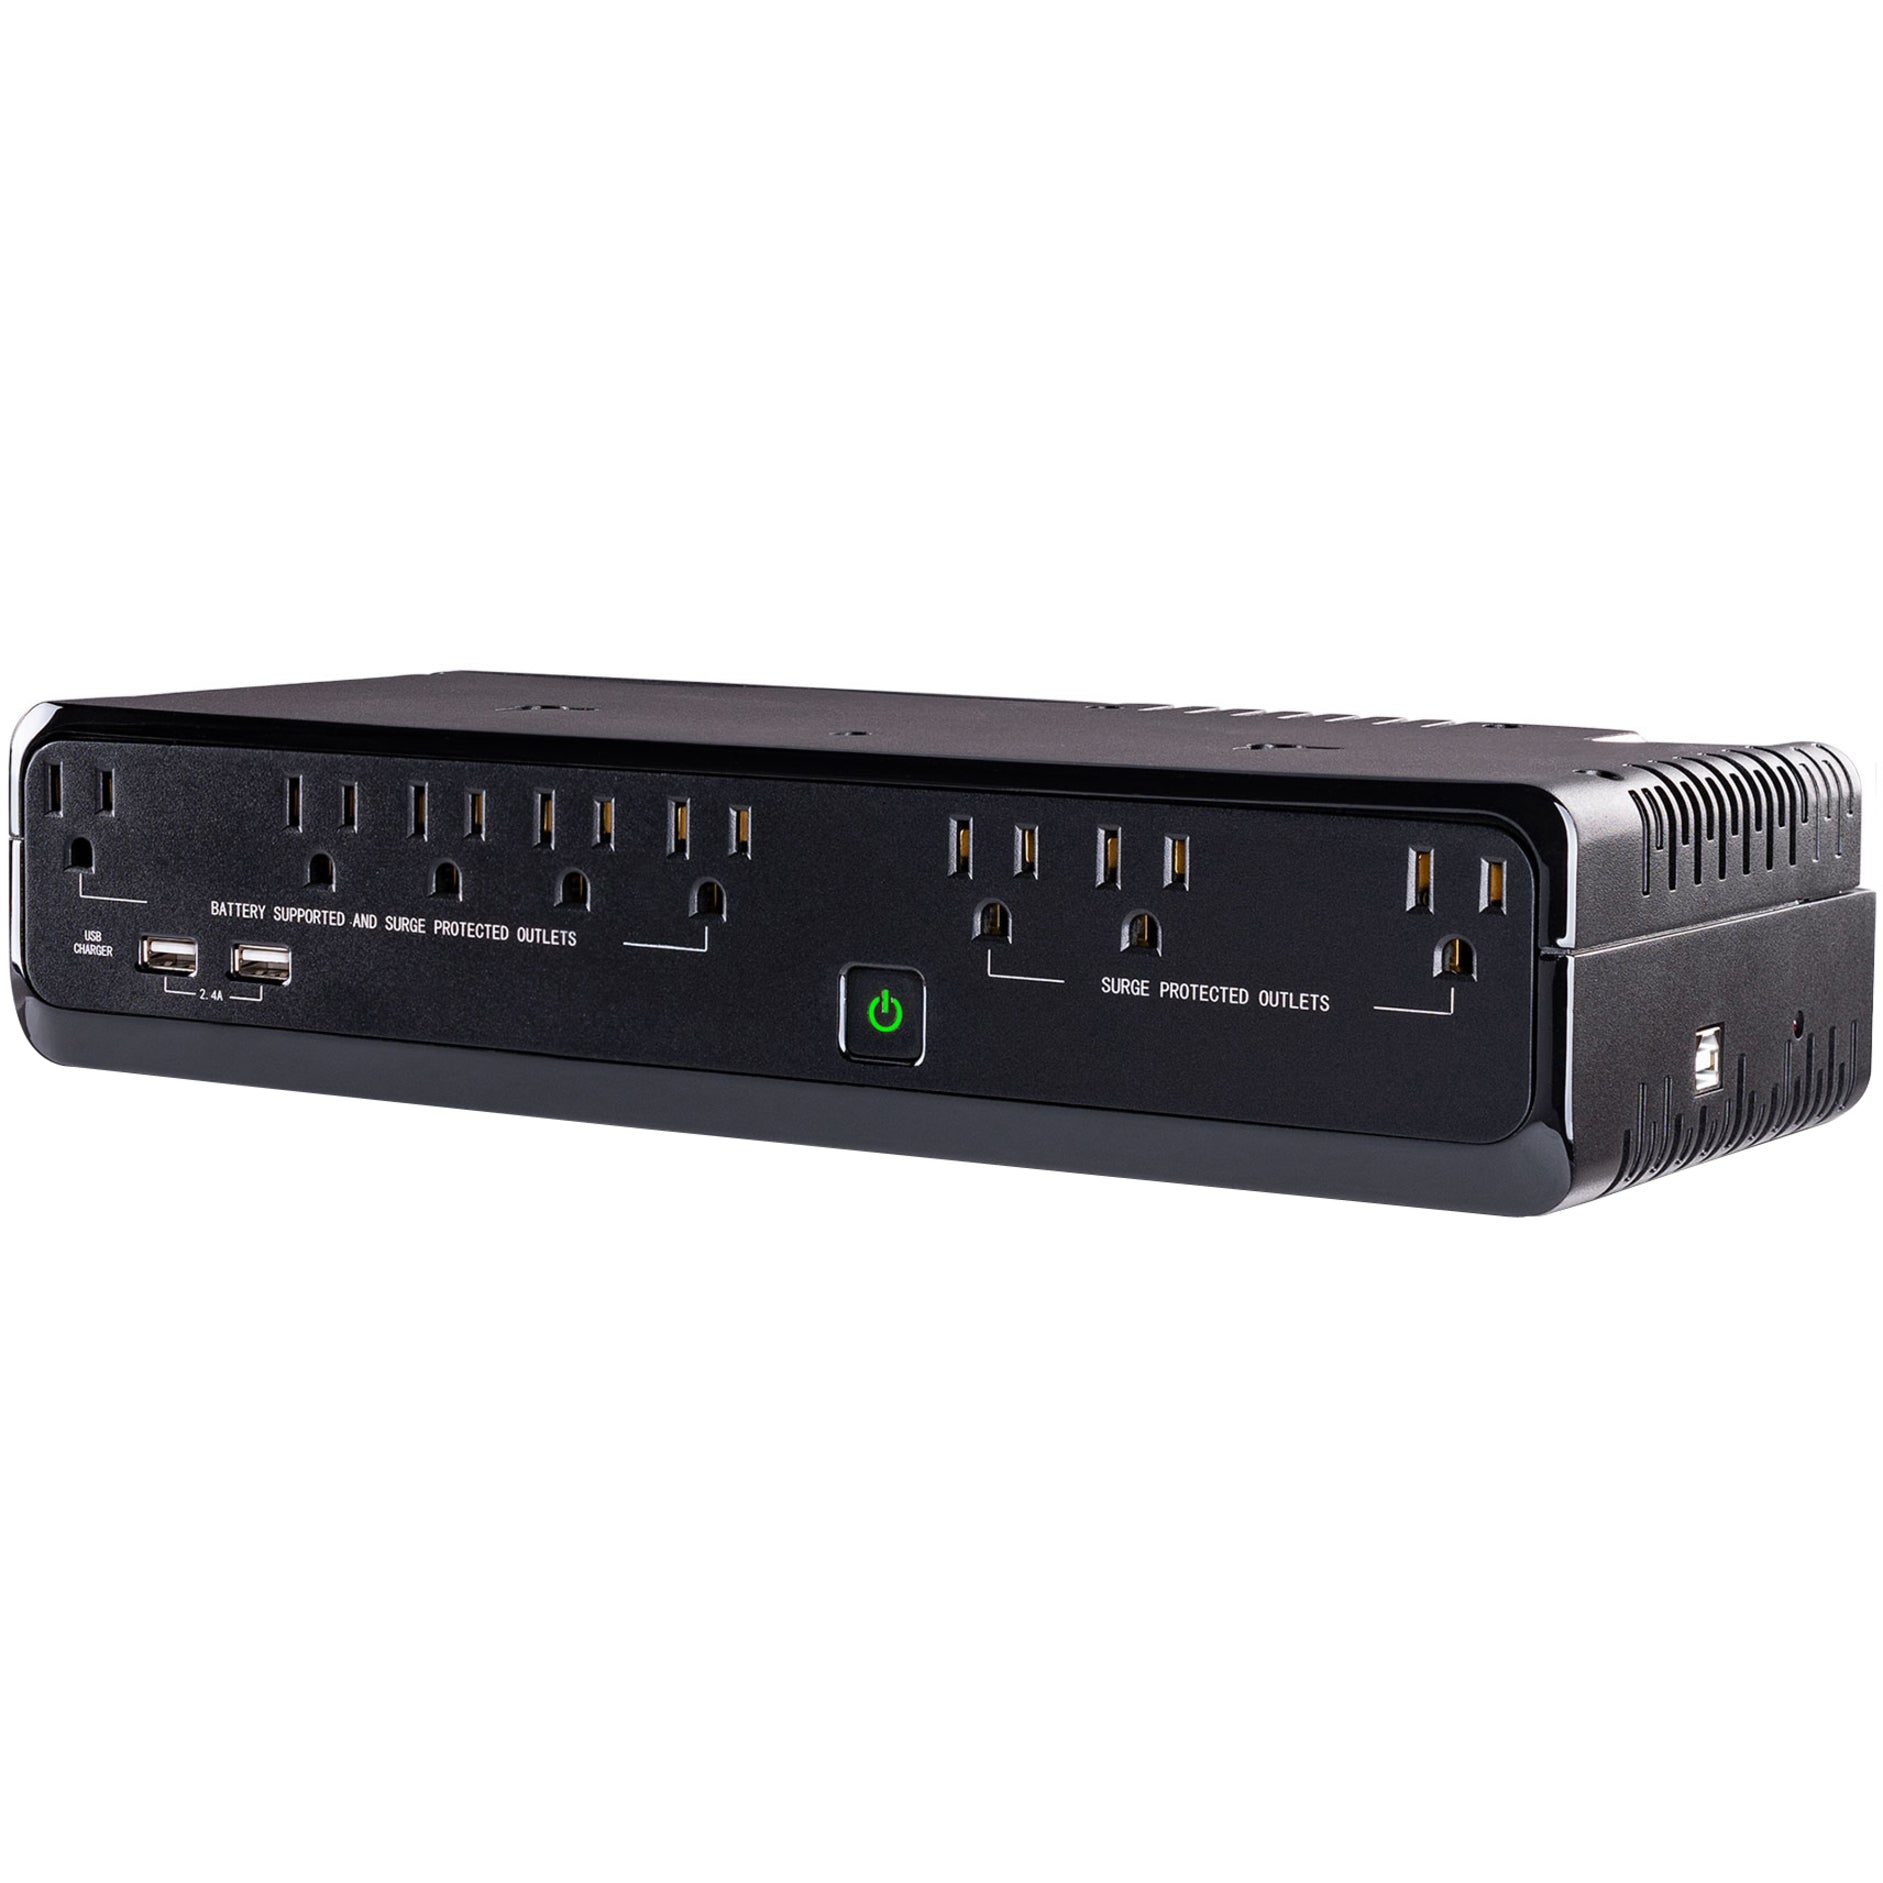 CyberPower SL700U Standby UPS, 8 Outlets, 5 ft Cord, 3 Year Warranty